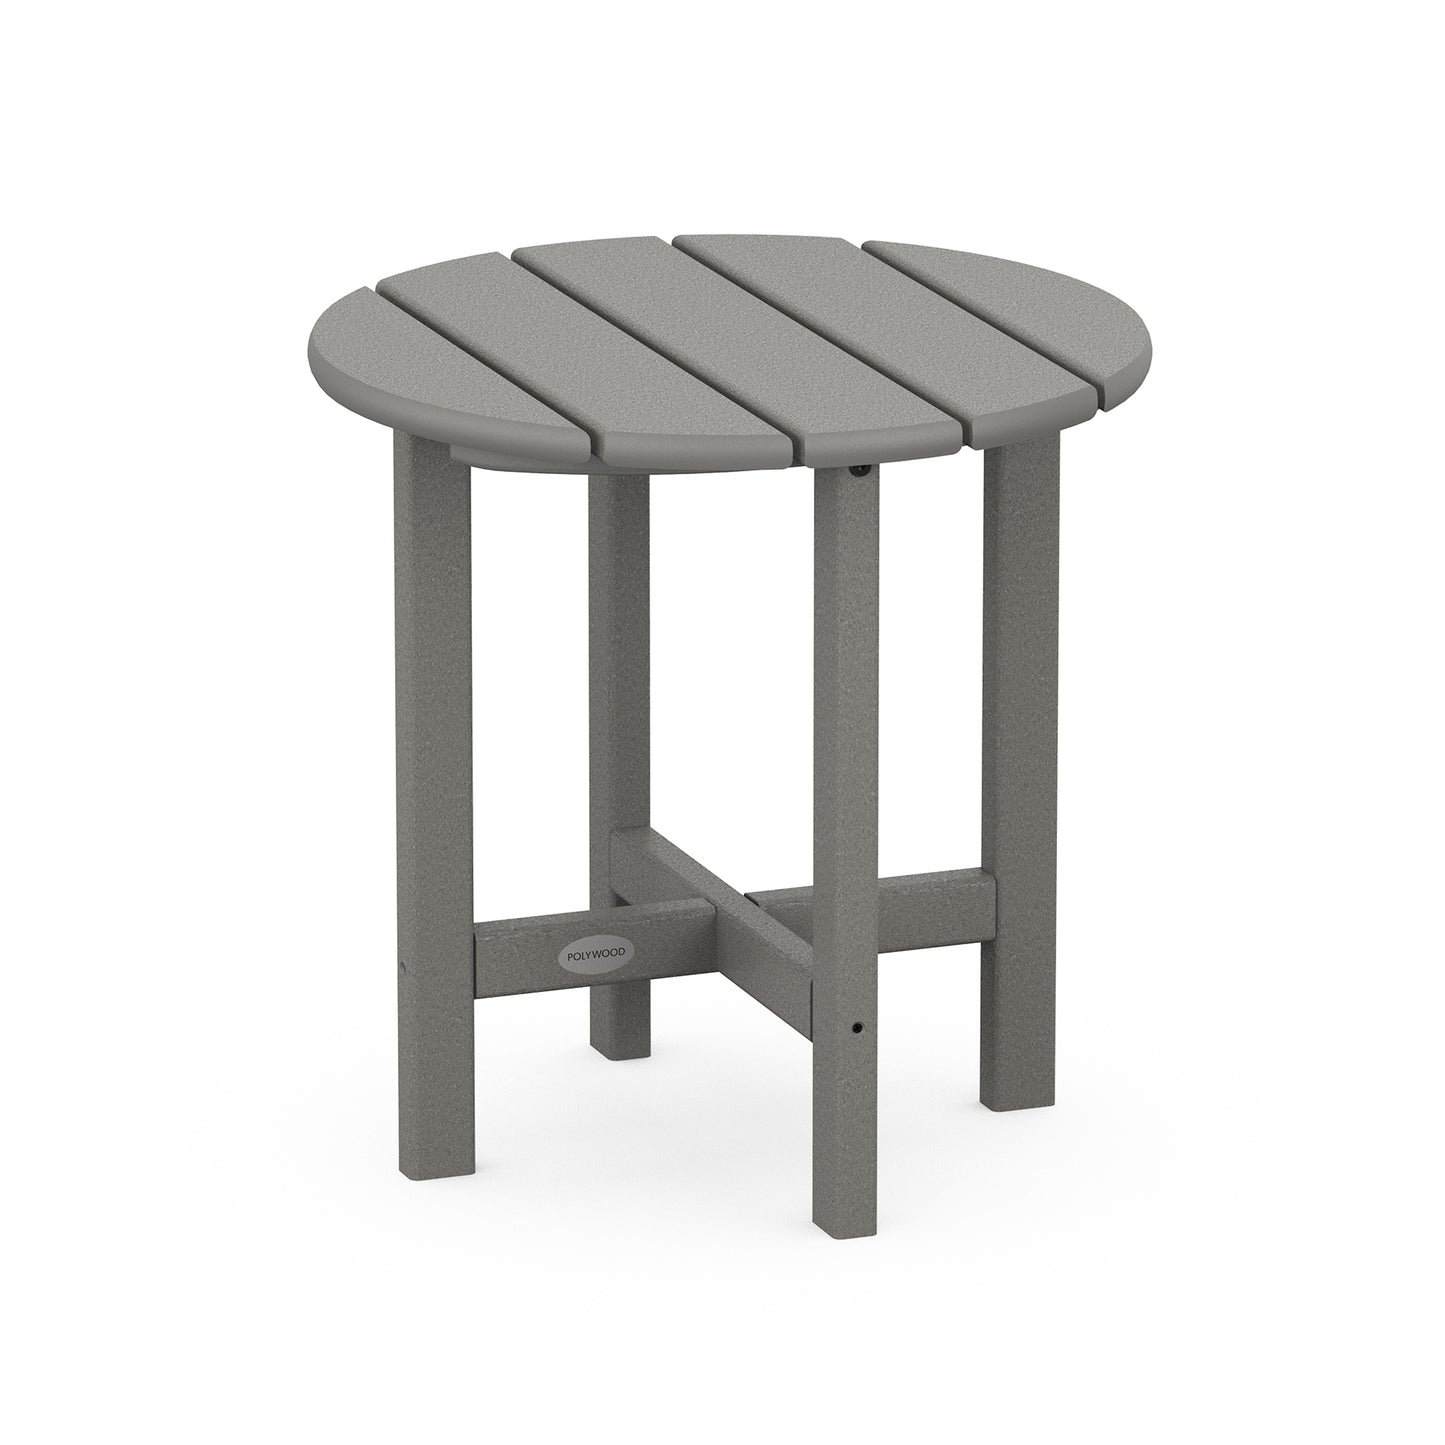 A 3D rendering of a modern POLYWOOD® 18" Round Side Table with three grey, rectangular, slatted top sections supported by a sturdy, triangular leg structure, isolated on a white background.